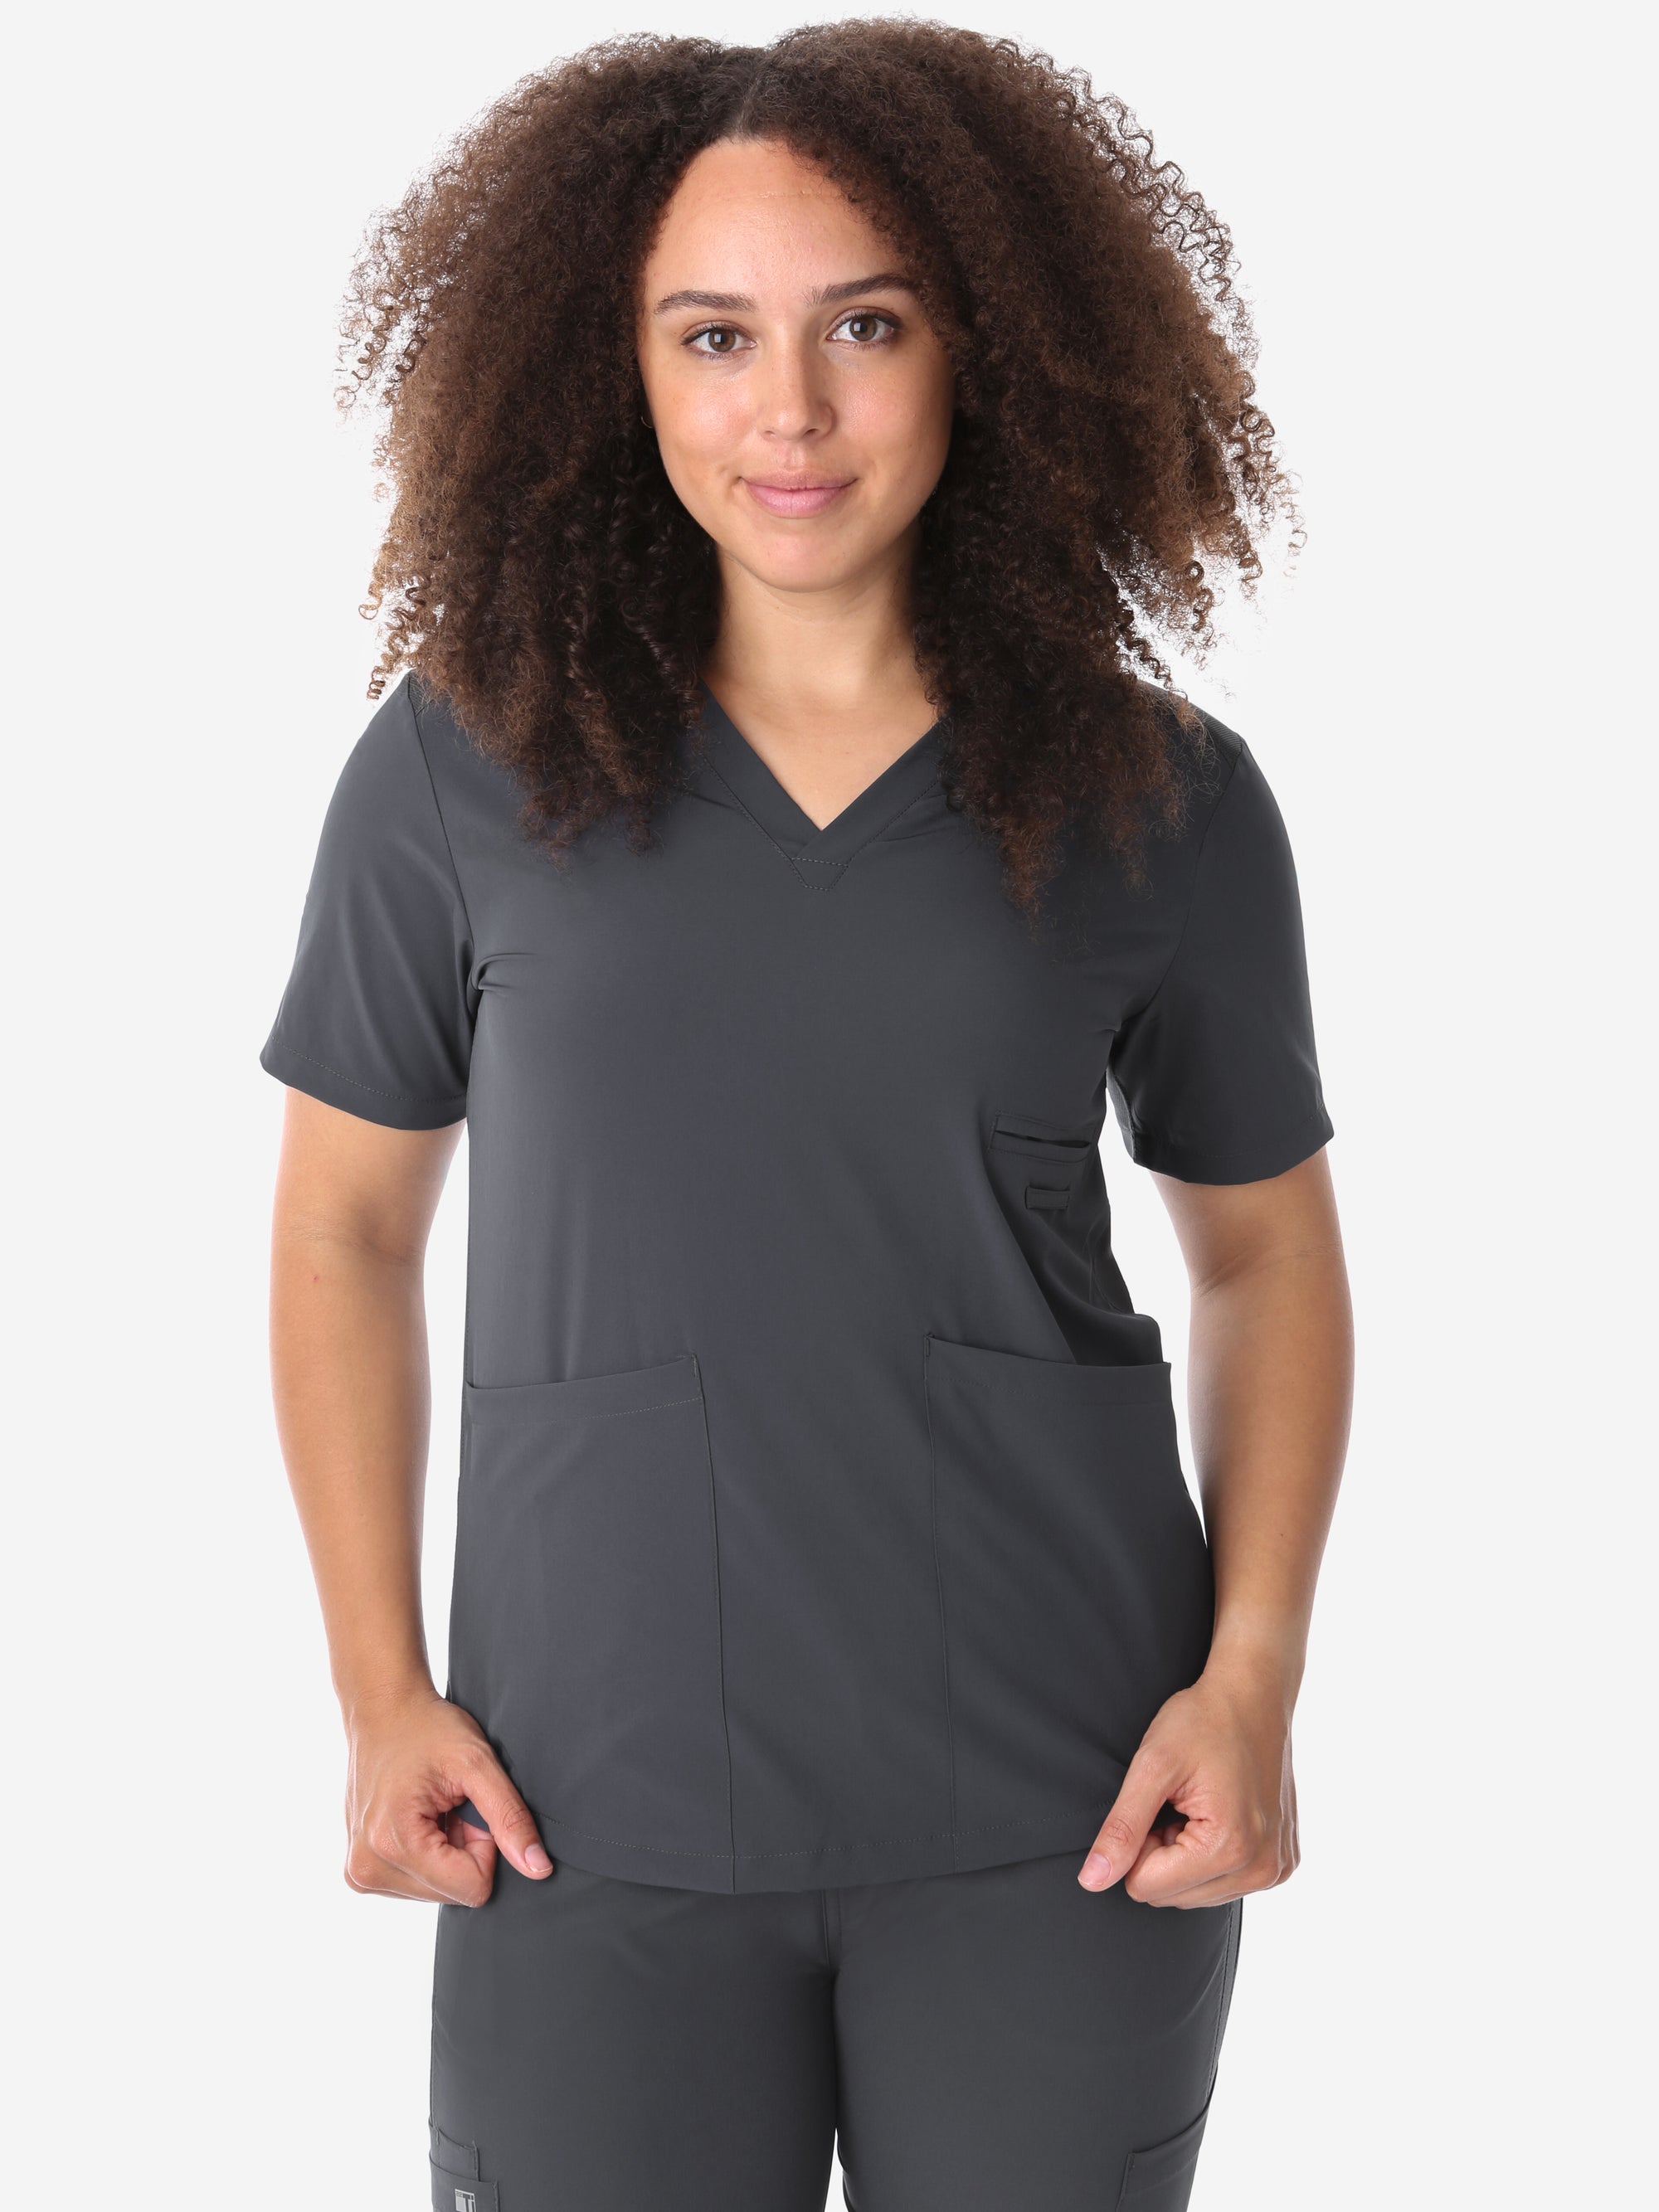 Women's Four-Pocket Scrub Top Charcoal Top Only Front View